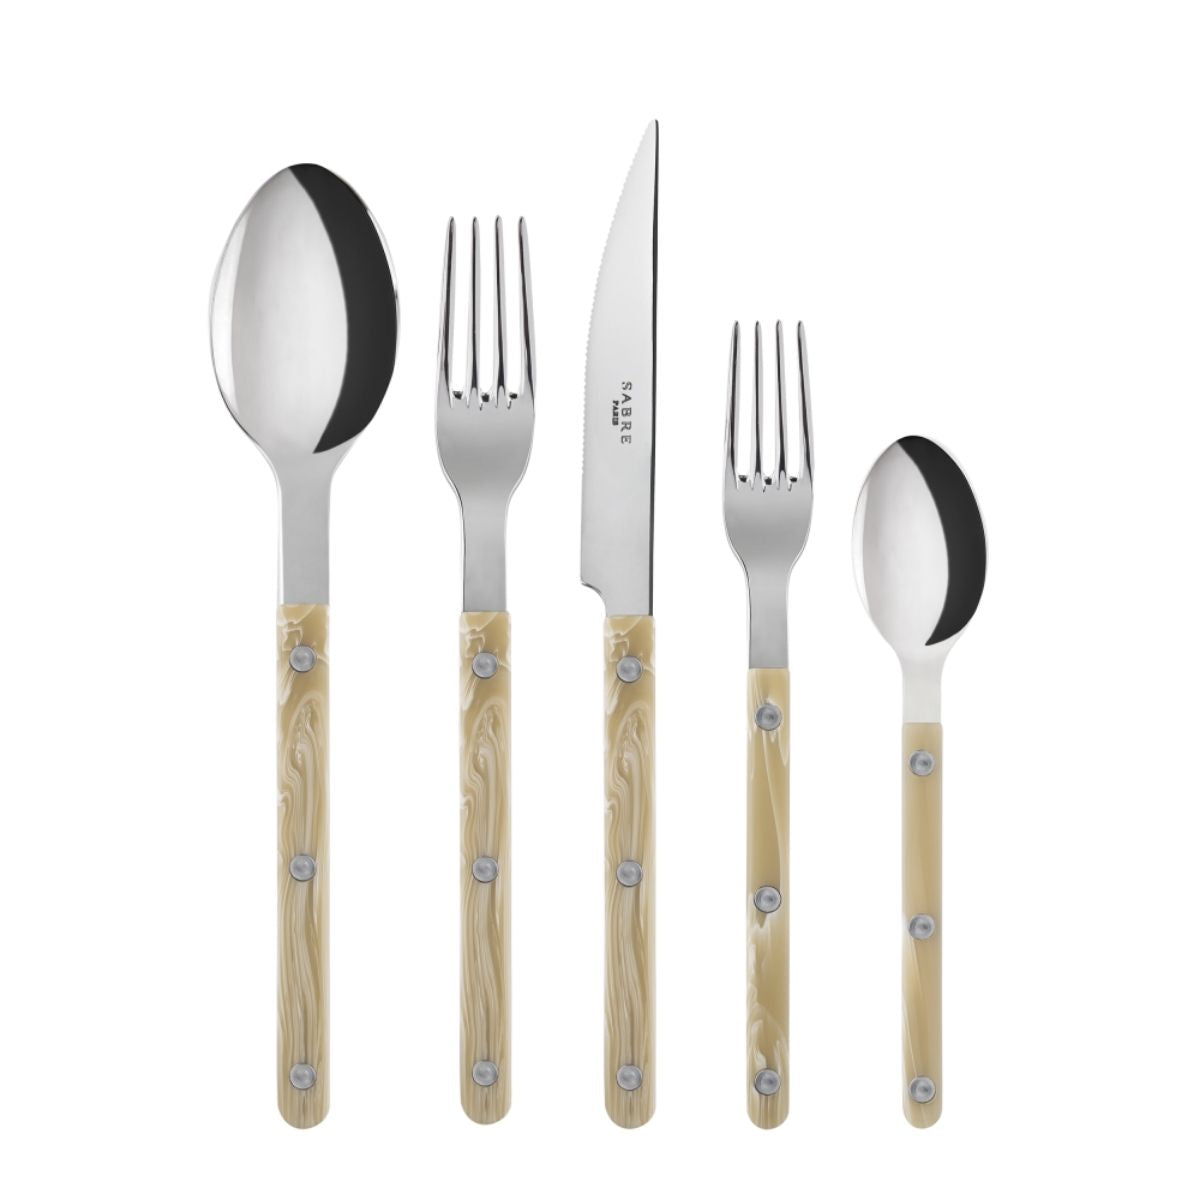 Sabre Bistrot Matieres 5 Piece Place Setting - Shiny Finish Horn